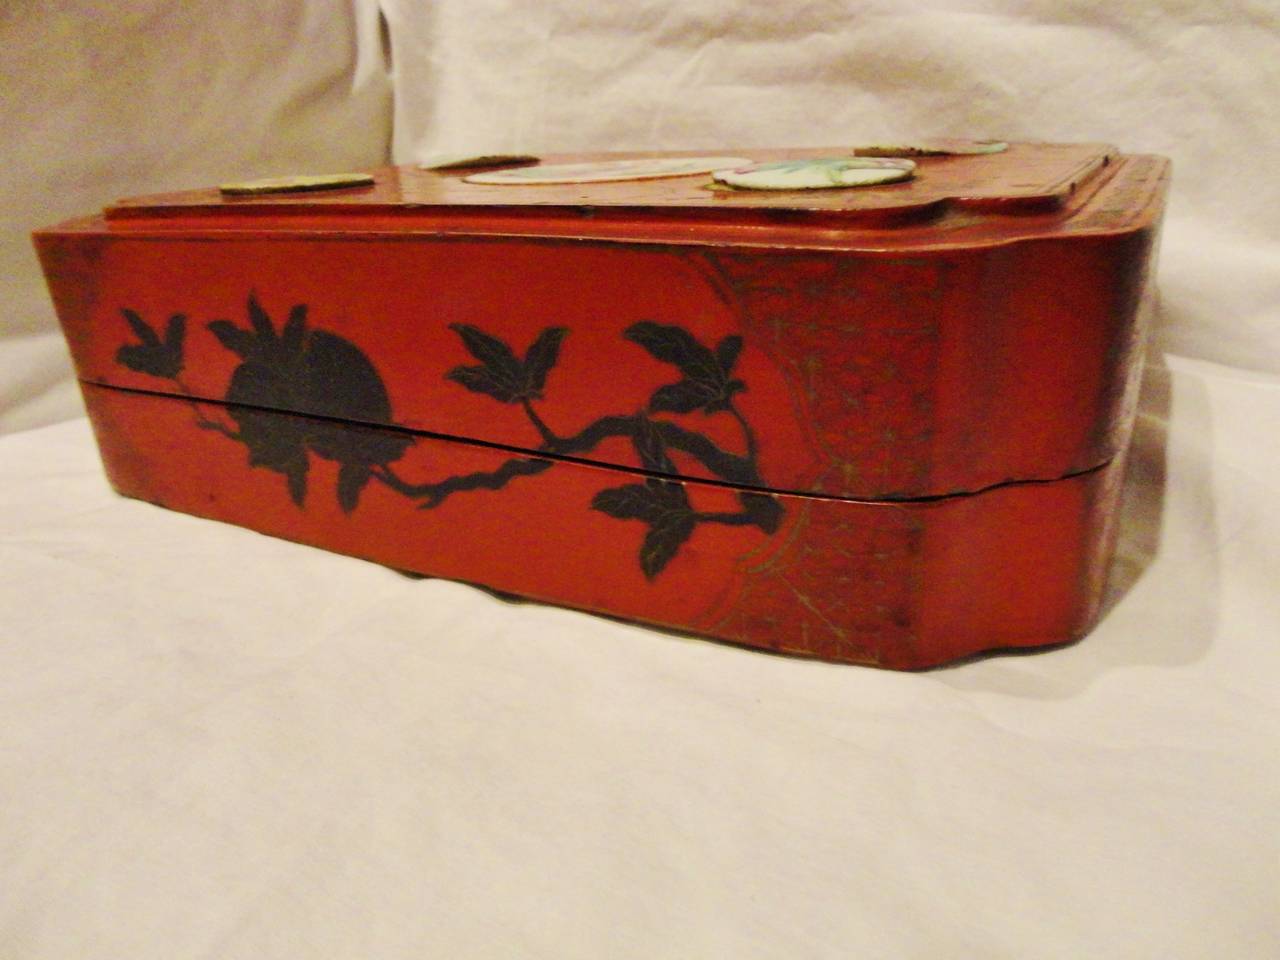 Beautiful box is painted in brilliant, pure cinnabar red, a prized lacquer that's till this day admired and treasured. Delicate ink paintings depict various flowers and butterflies which are symbols of happiness and love. Another important feature